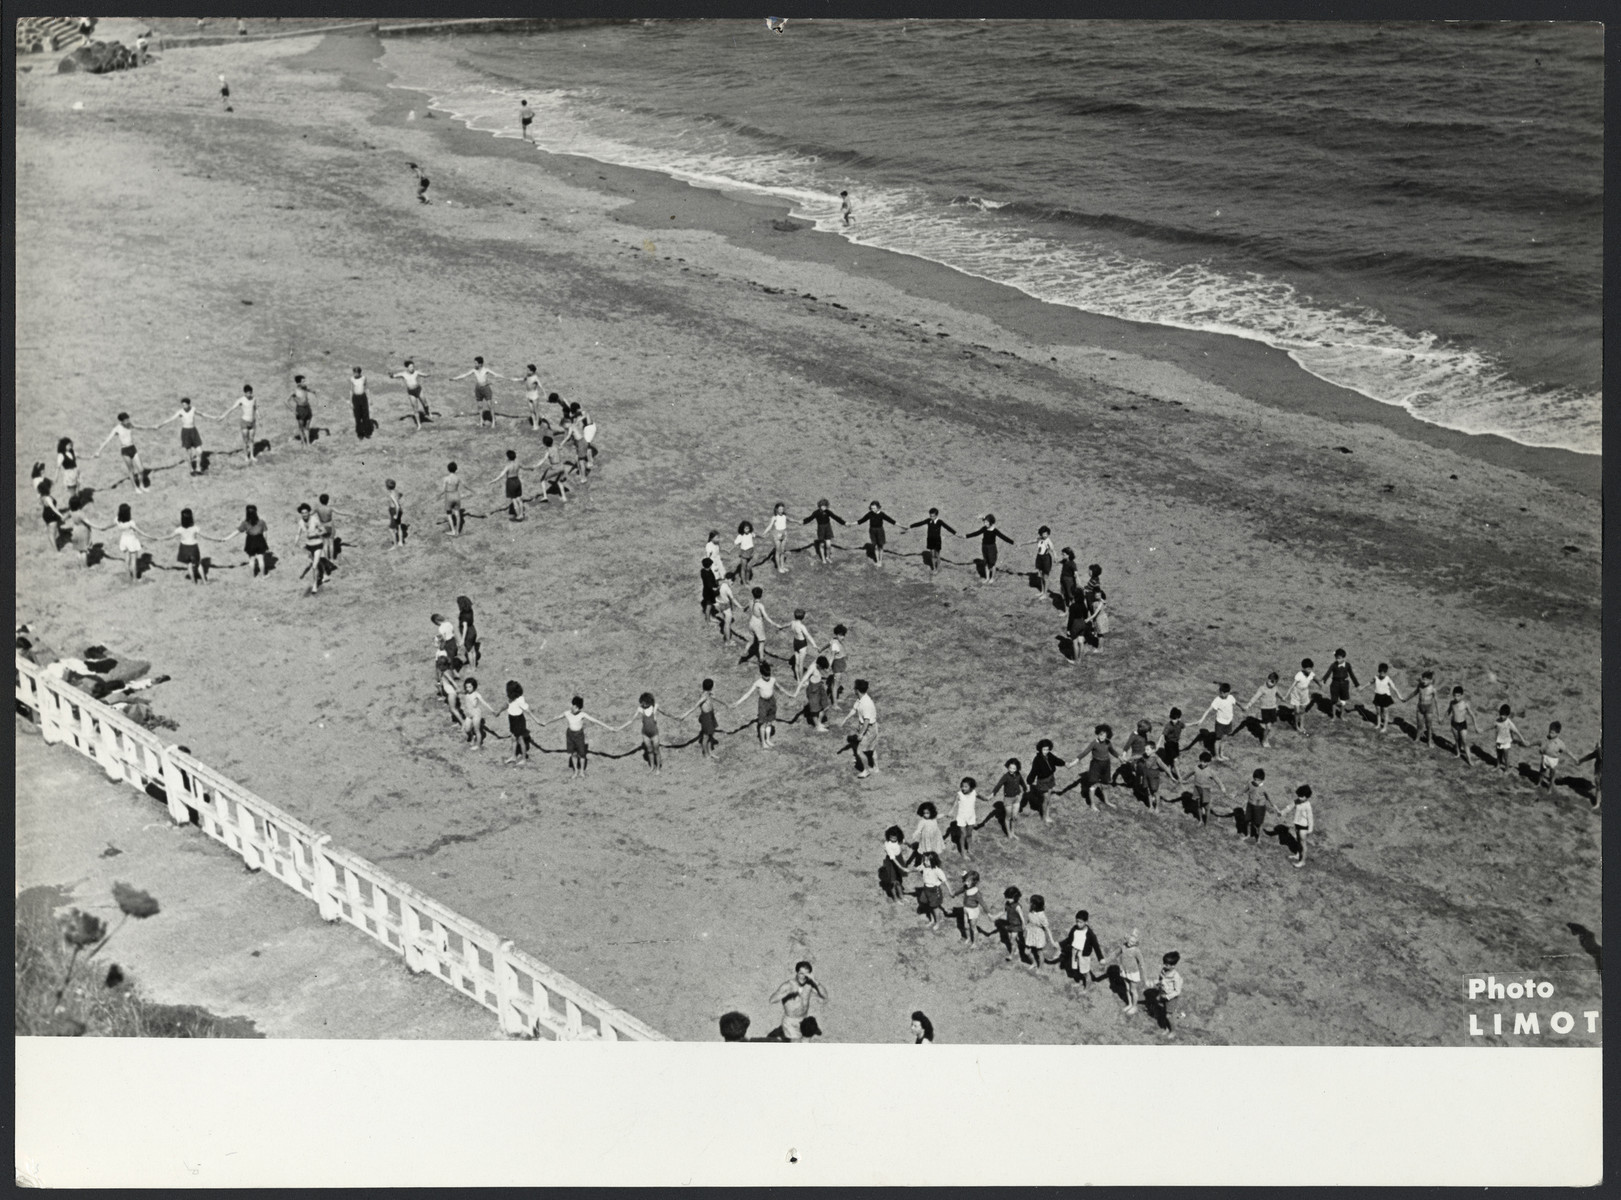 Children spell out the word "OSE" on the beach in Saint Quay.

The original caption reads "Vacation at the seaside".